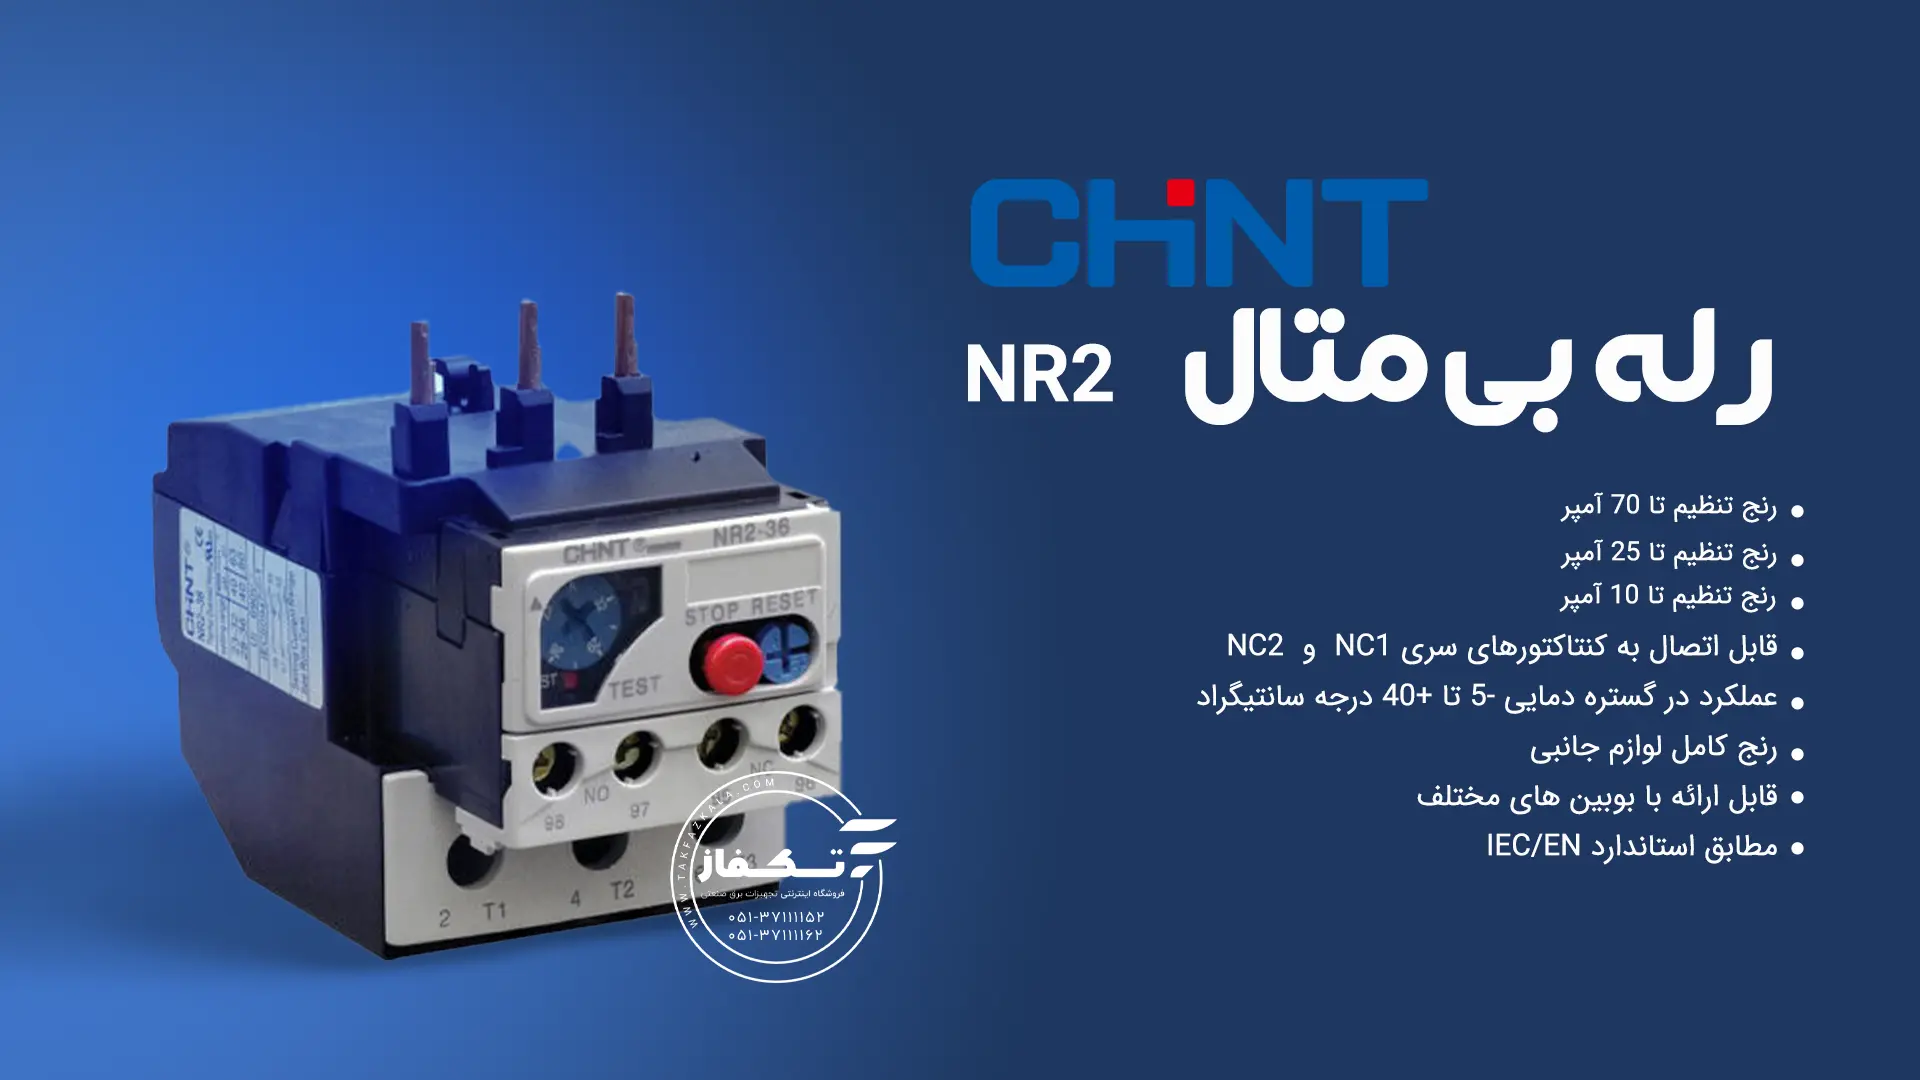 Non-metal NR2 relay, adjustment range up to 25 amps